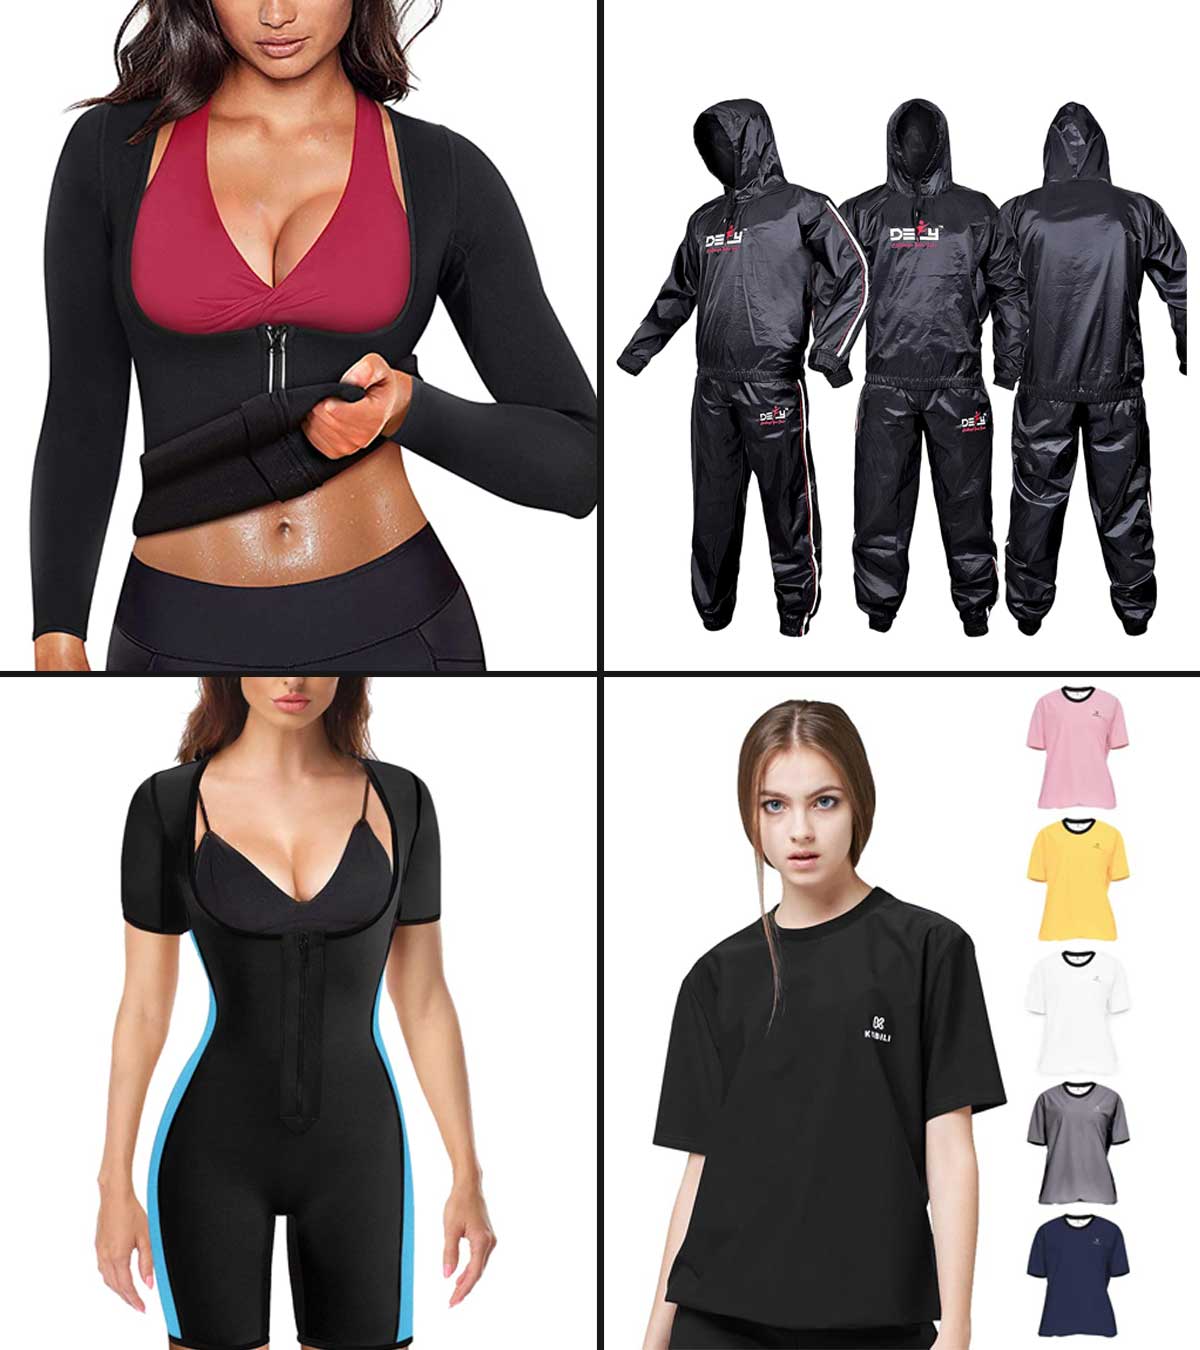 DNRZY F.I.T Sweat Sauna Suits Durable Long Sleeves Running Workout Clothes 